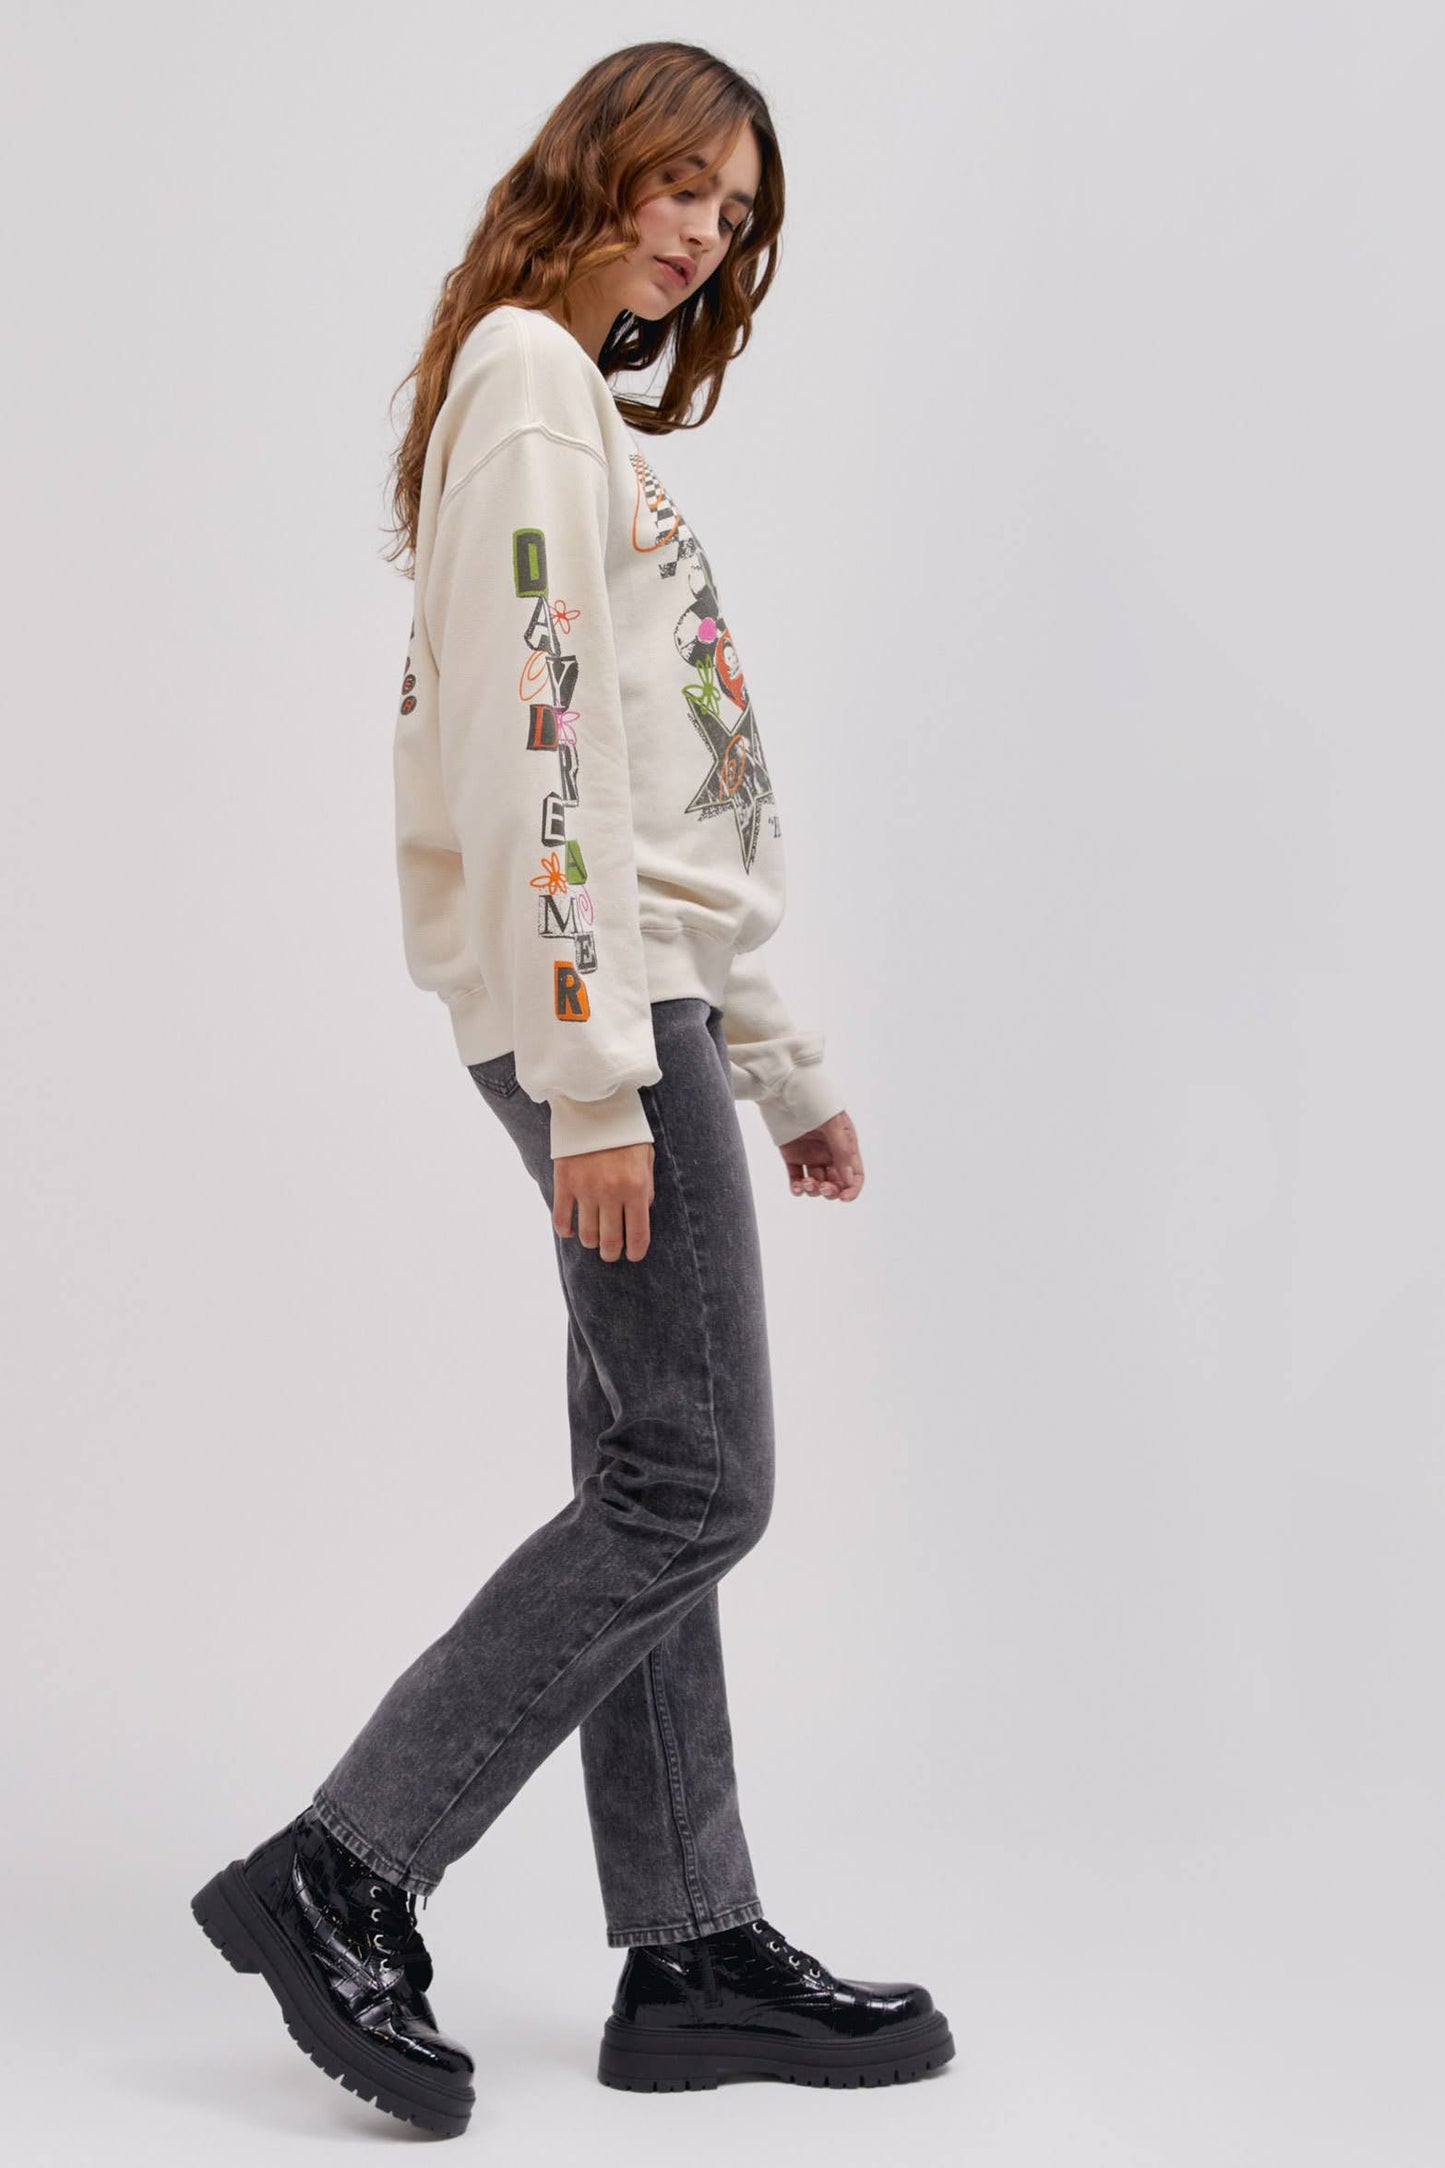 side profile pose of model wearing graphic sweatshirt and washed denim jeans